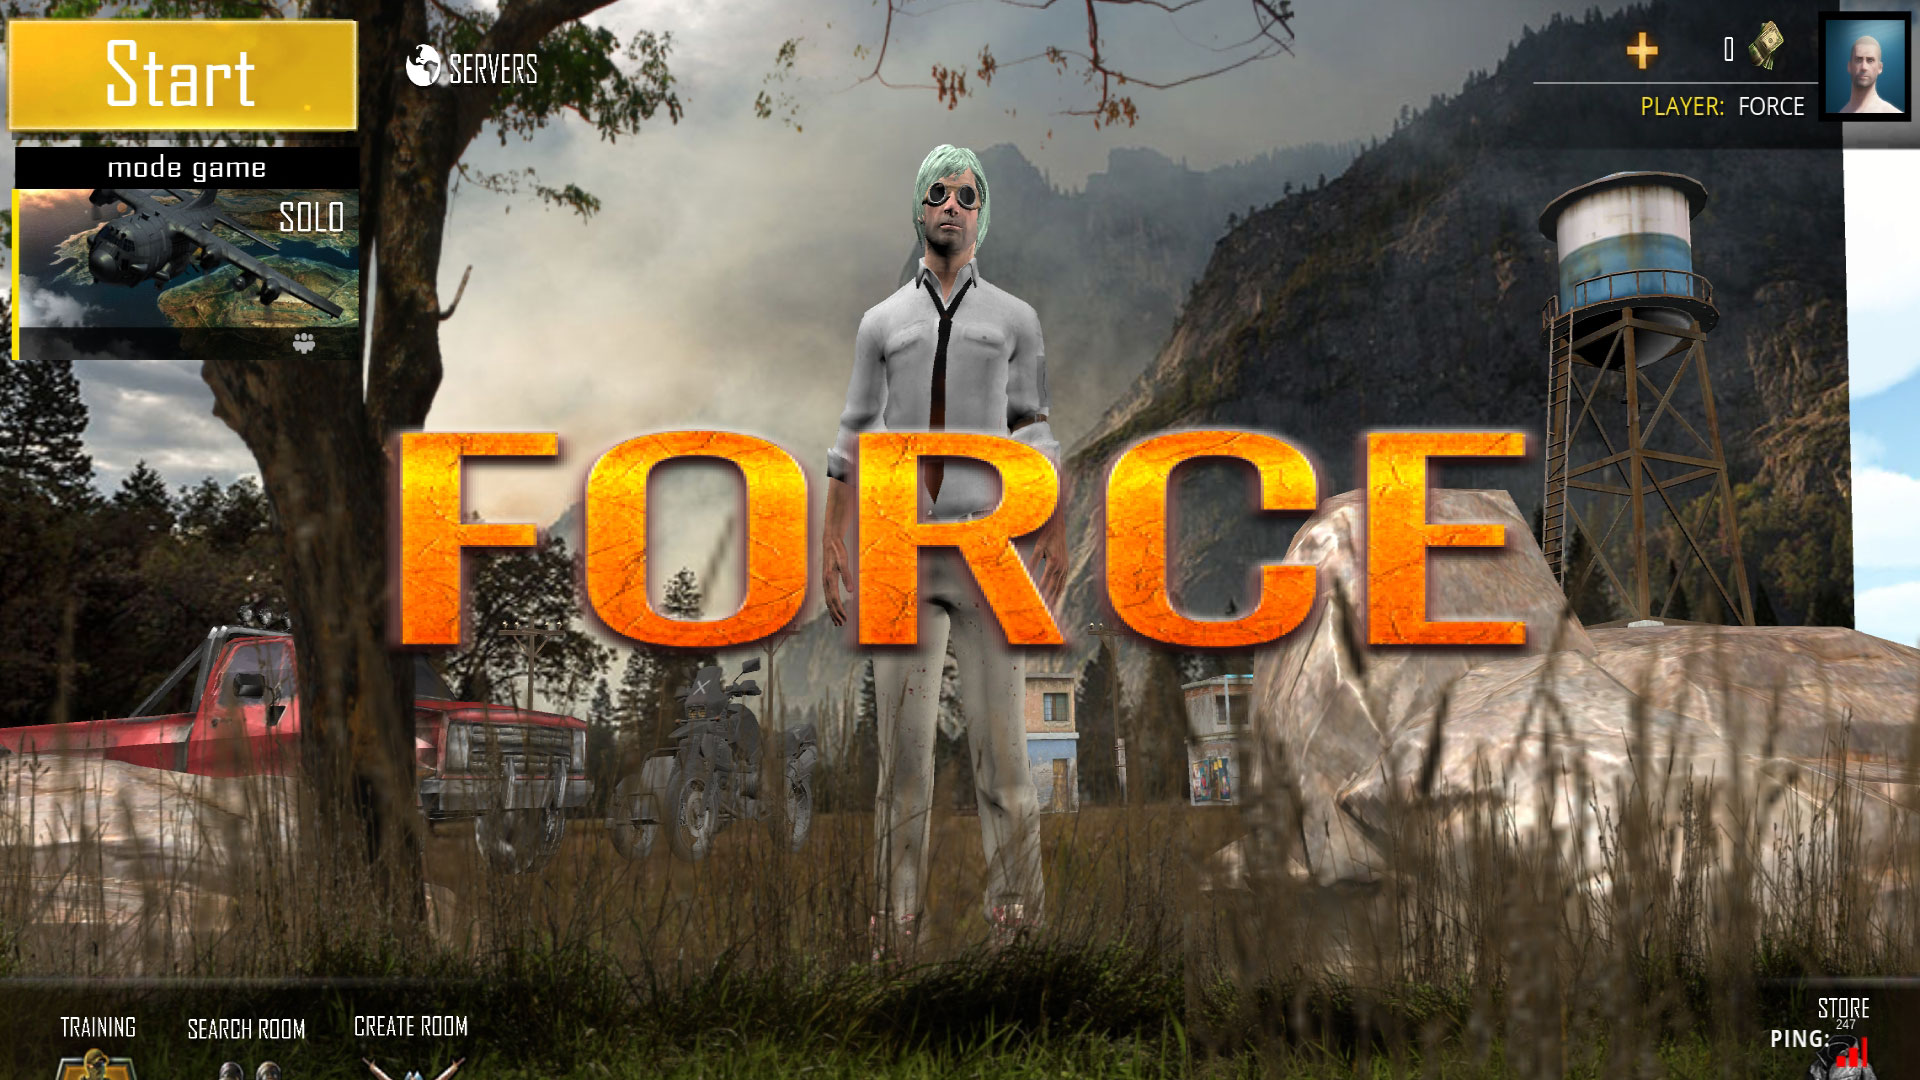 FORCE battle game now live for pre-registration on Google Play Store, launch expected soon